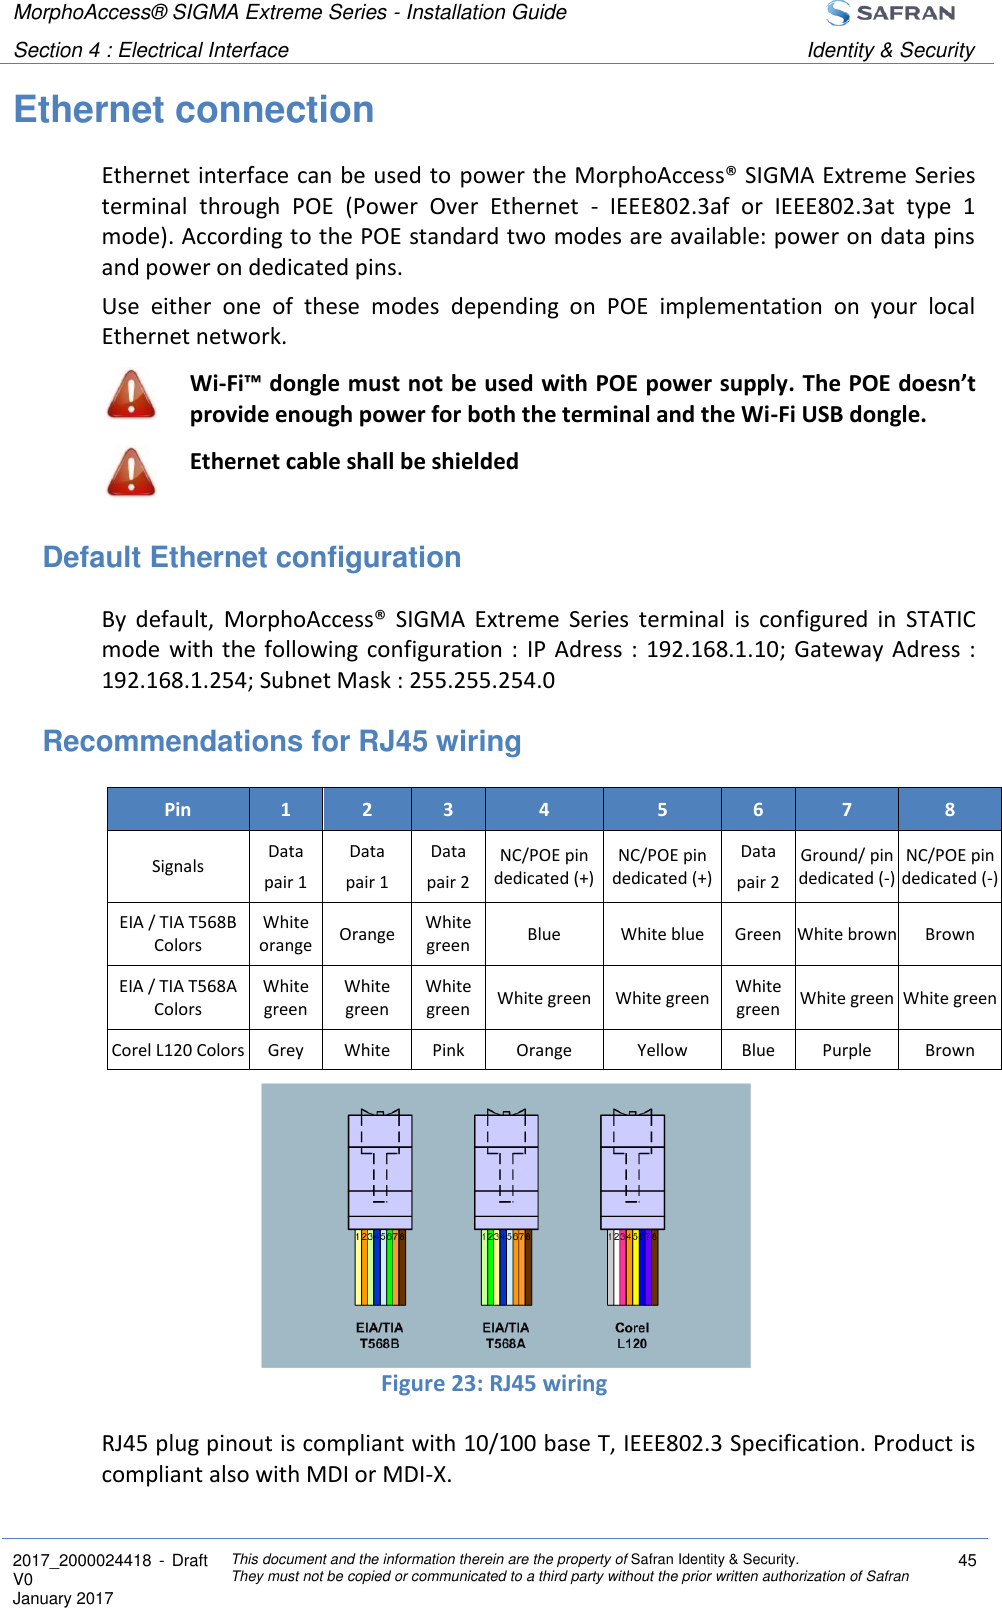 MorphoAccess® SIGMA Extreme Series - Installation Guide  Section 4 : Electrical Interface Identity &amp; Security  2017_2000024418  - Draft V0 January 2017 This document and the information therein are the property of Safran Identity &amp; Security. They must not be copied or communicated to a third party without the prior written authorization of Safran 45  Ethernet connection Ethernet interface can be used to power the MorphoAccess® SIGMA Extreme Series terminal  through  POE  (Power  Over  Ethernet  -  IEEE802.3af  or  IEEE802.3at  type  1 mode). According to the POE standard two modes are available: power on data pins and power on dedicated pins. Use  either  one  of  these  modes  depending  on  POE  implementation  on  your  local Ethernet network.  Wi-Fi™ dongle must not be used with POE power supply. The POE doesn’t provide enough power for both the terminal and the Wi-Fi USB dongle.  Ethernet cable shall be shielded Default Ethernet configuration By  default,  MorphoAccess®  SIGMA  Extreme  Series  terminal  is  configured  in  STATIC mode  with the following configuration :  IP Adress :  192.168.1.10;  Gateway Adress : 192.168.1.254; Subnet Mask : 255.255.254.0 Recommendations for RJ45 wiring Pin 1 2 3 4 5 6 7 8 Signals Data  pair 1 Data  pair 1 Data  pair 2 NC/POE pin dedicated (+) NC/POE pin dedicated (+) Data  pair 2 Ground/ pin dedicated (-) NC/POE pin dedicated (-) EIA / TIA T568B Colors White orange Orange White green Blue White blue Green White brown Brown EIA / TIA T568A Colors White green White green White green White green White green White green White green White green Corel L120 Colors Grey White Pink Orange Yellow Blue Purple Brown      Figure 23: RJ45 wiring RJ45 plug pinout is compliant with 10/100 base T, IEEE802.3 Specification. Product is compliant also with MDI or MDI-X. 